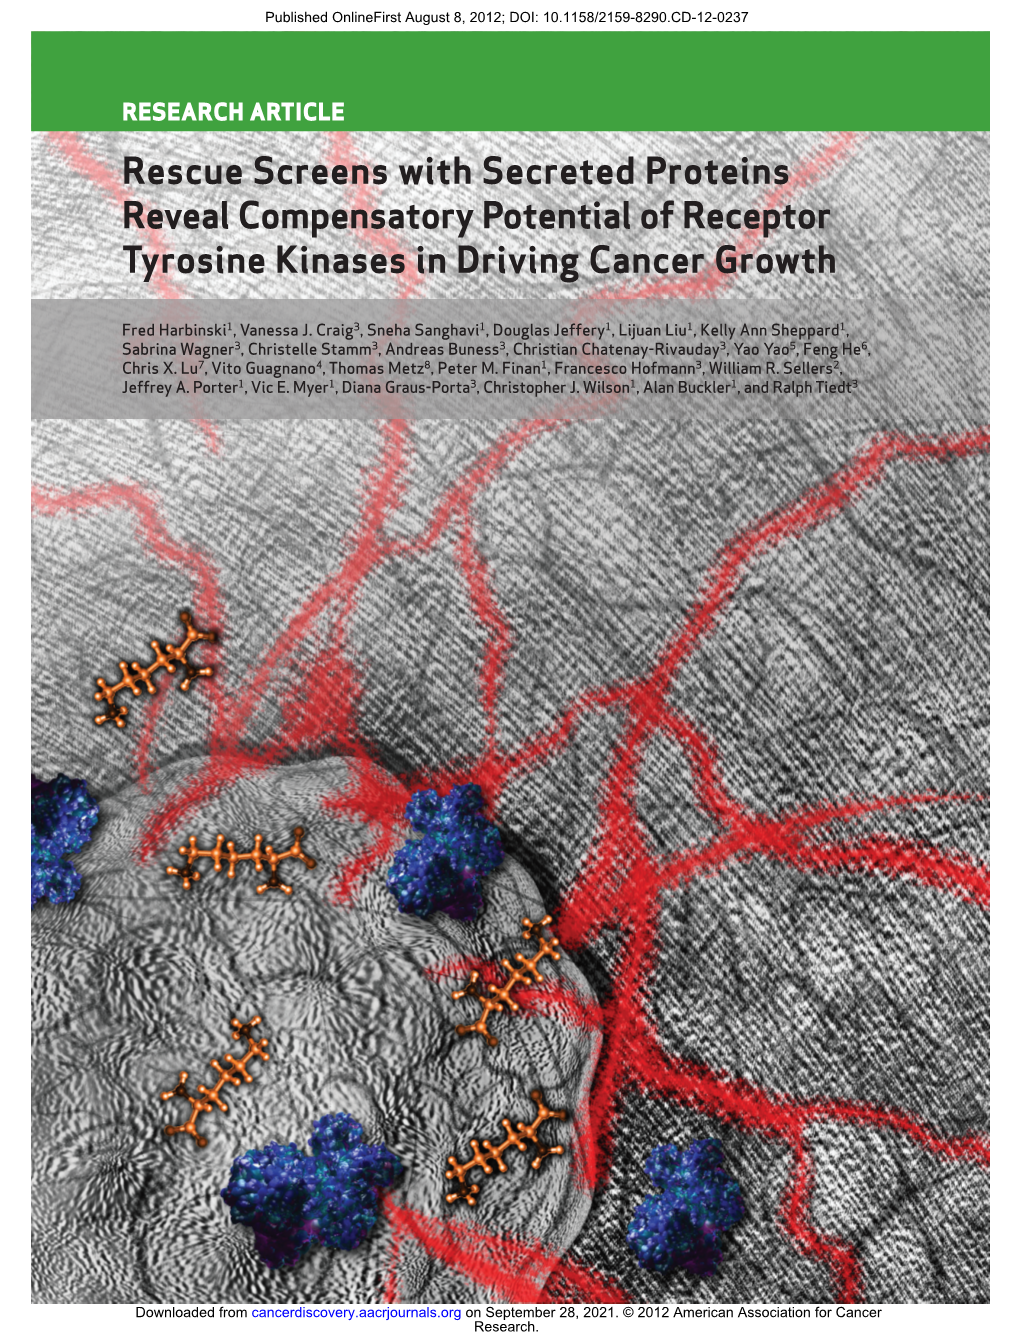 Rescue Screens with Secreted Proteins Reveal Compensatory Potential of Receptor Tyrosine Kinases in Driving Cancer Growth